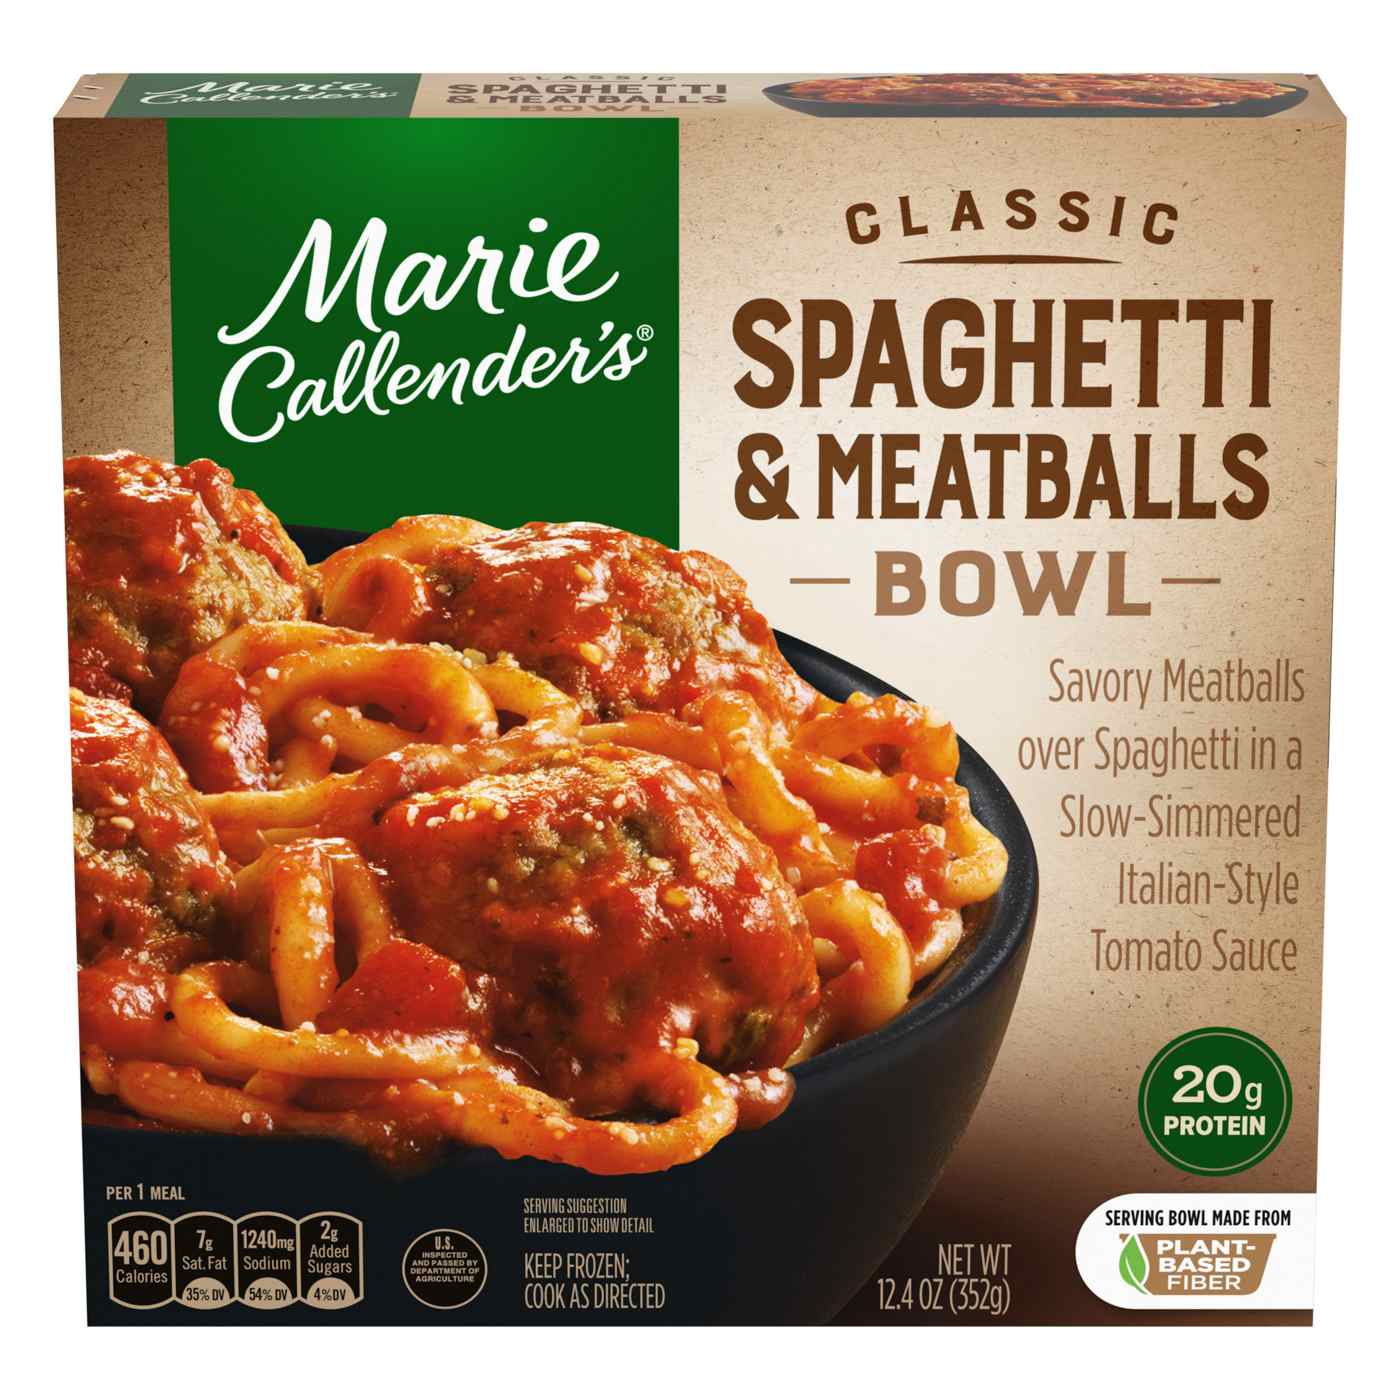 Marie Callender's Classic Spaghetti & Meatballs Bowl Frozen Meal; image 1 of 5